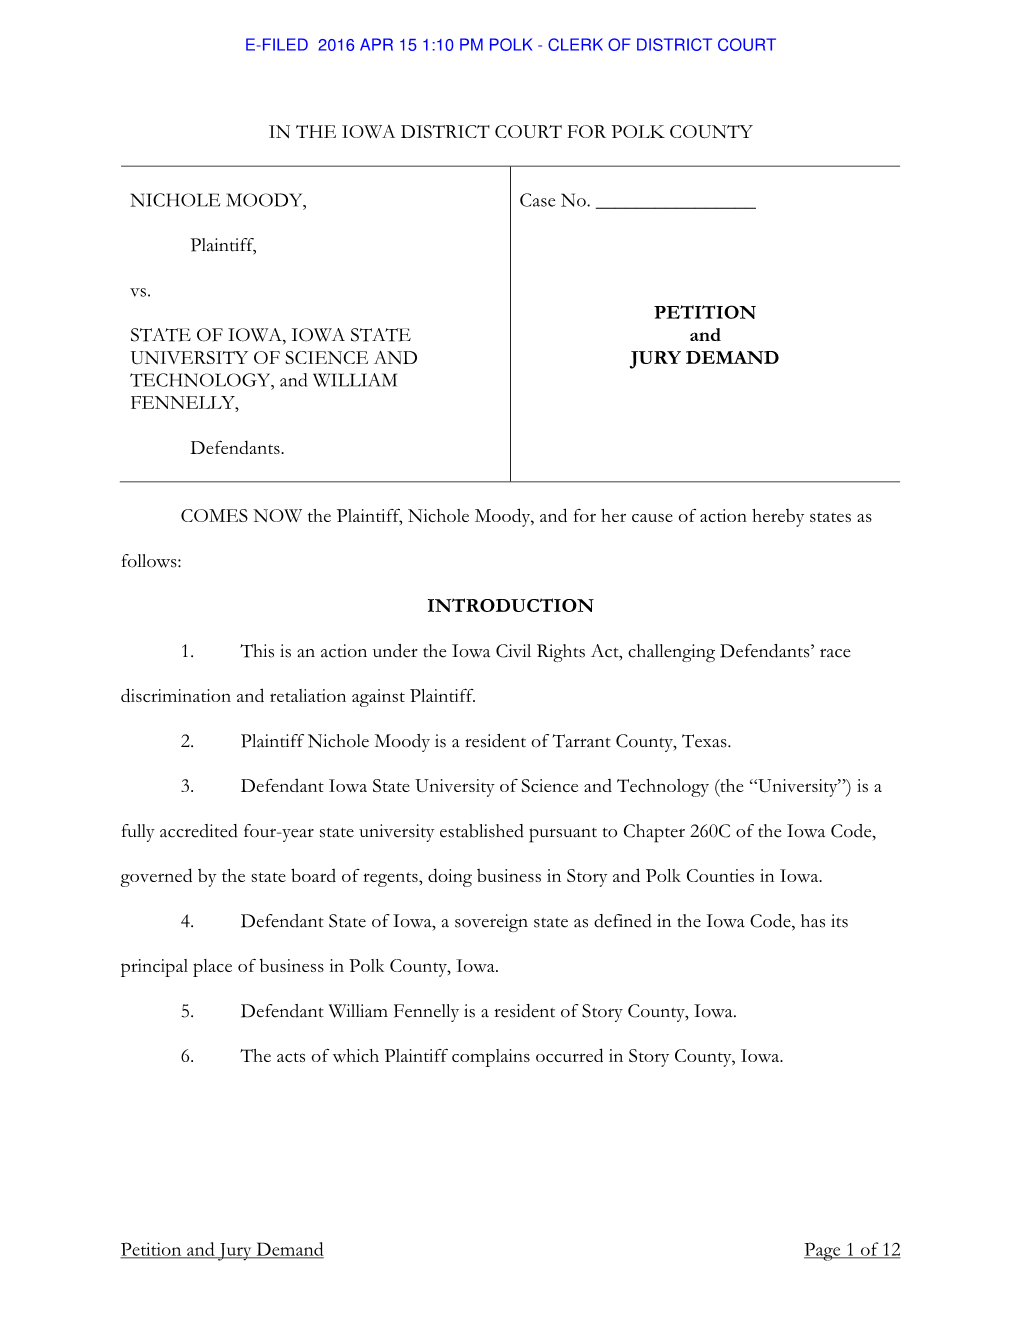 Petition and Jury Demand Page 1 of 12 in the IOWA DISTRICT COURT